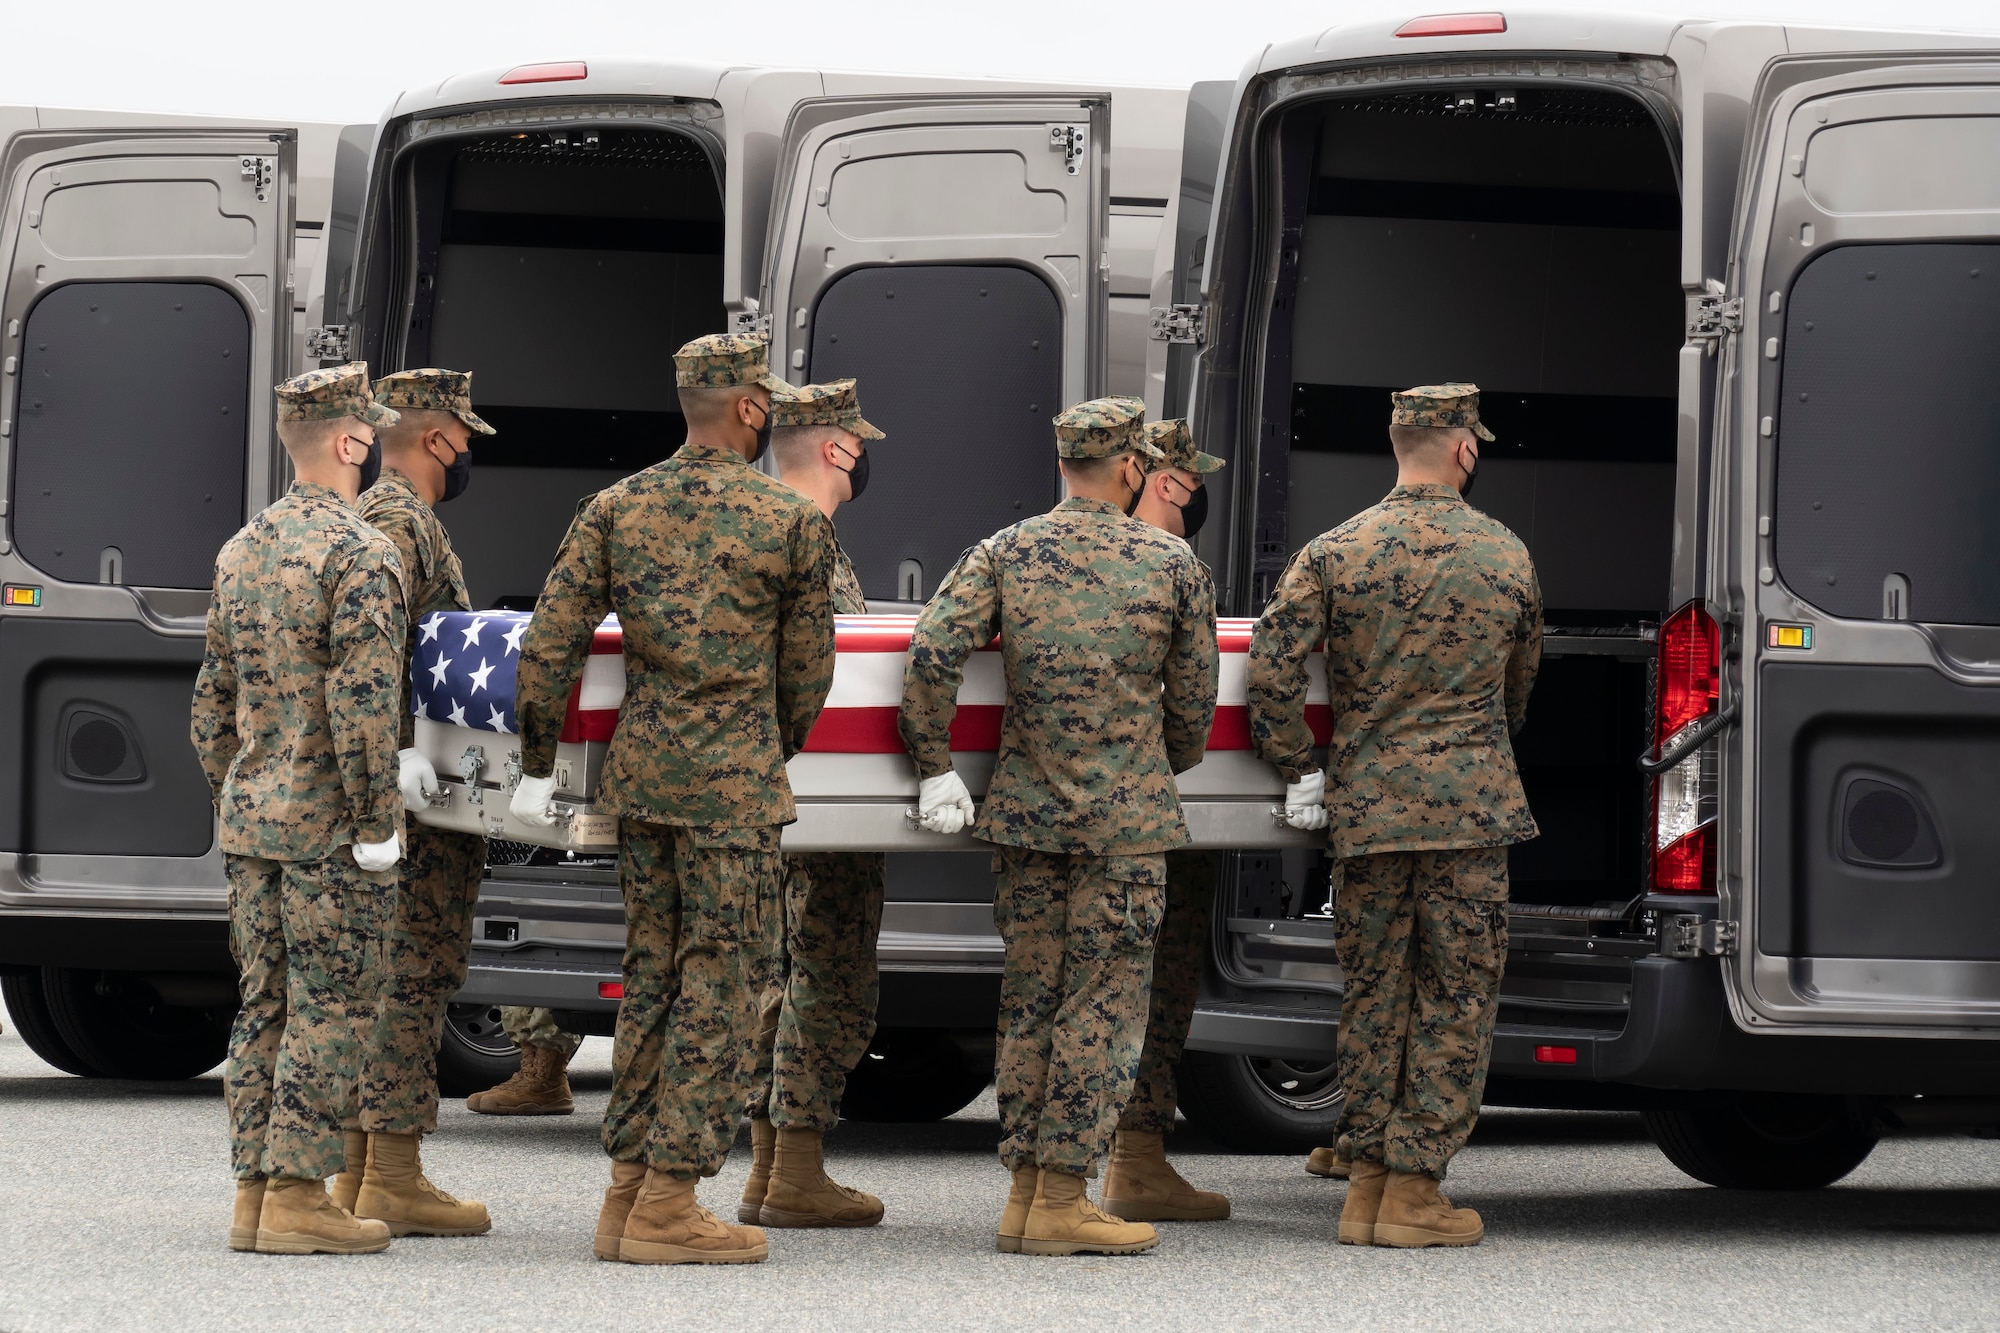 A U.S. Marine Corps carry team transfers the remains of Marine Corps Sgt. Nicole L. Gee of Sacramento, California, August 29, 2021 at Dover Air Force Base, Delaware. Gee was assigned to 2D Marine Logistics Group, II Marine Expeditionary Force, Camp Lejeune, North Carolina.  (U.S. Air Force photo by Jason Minto)